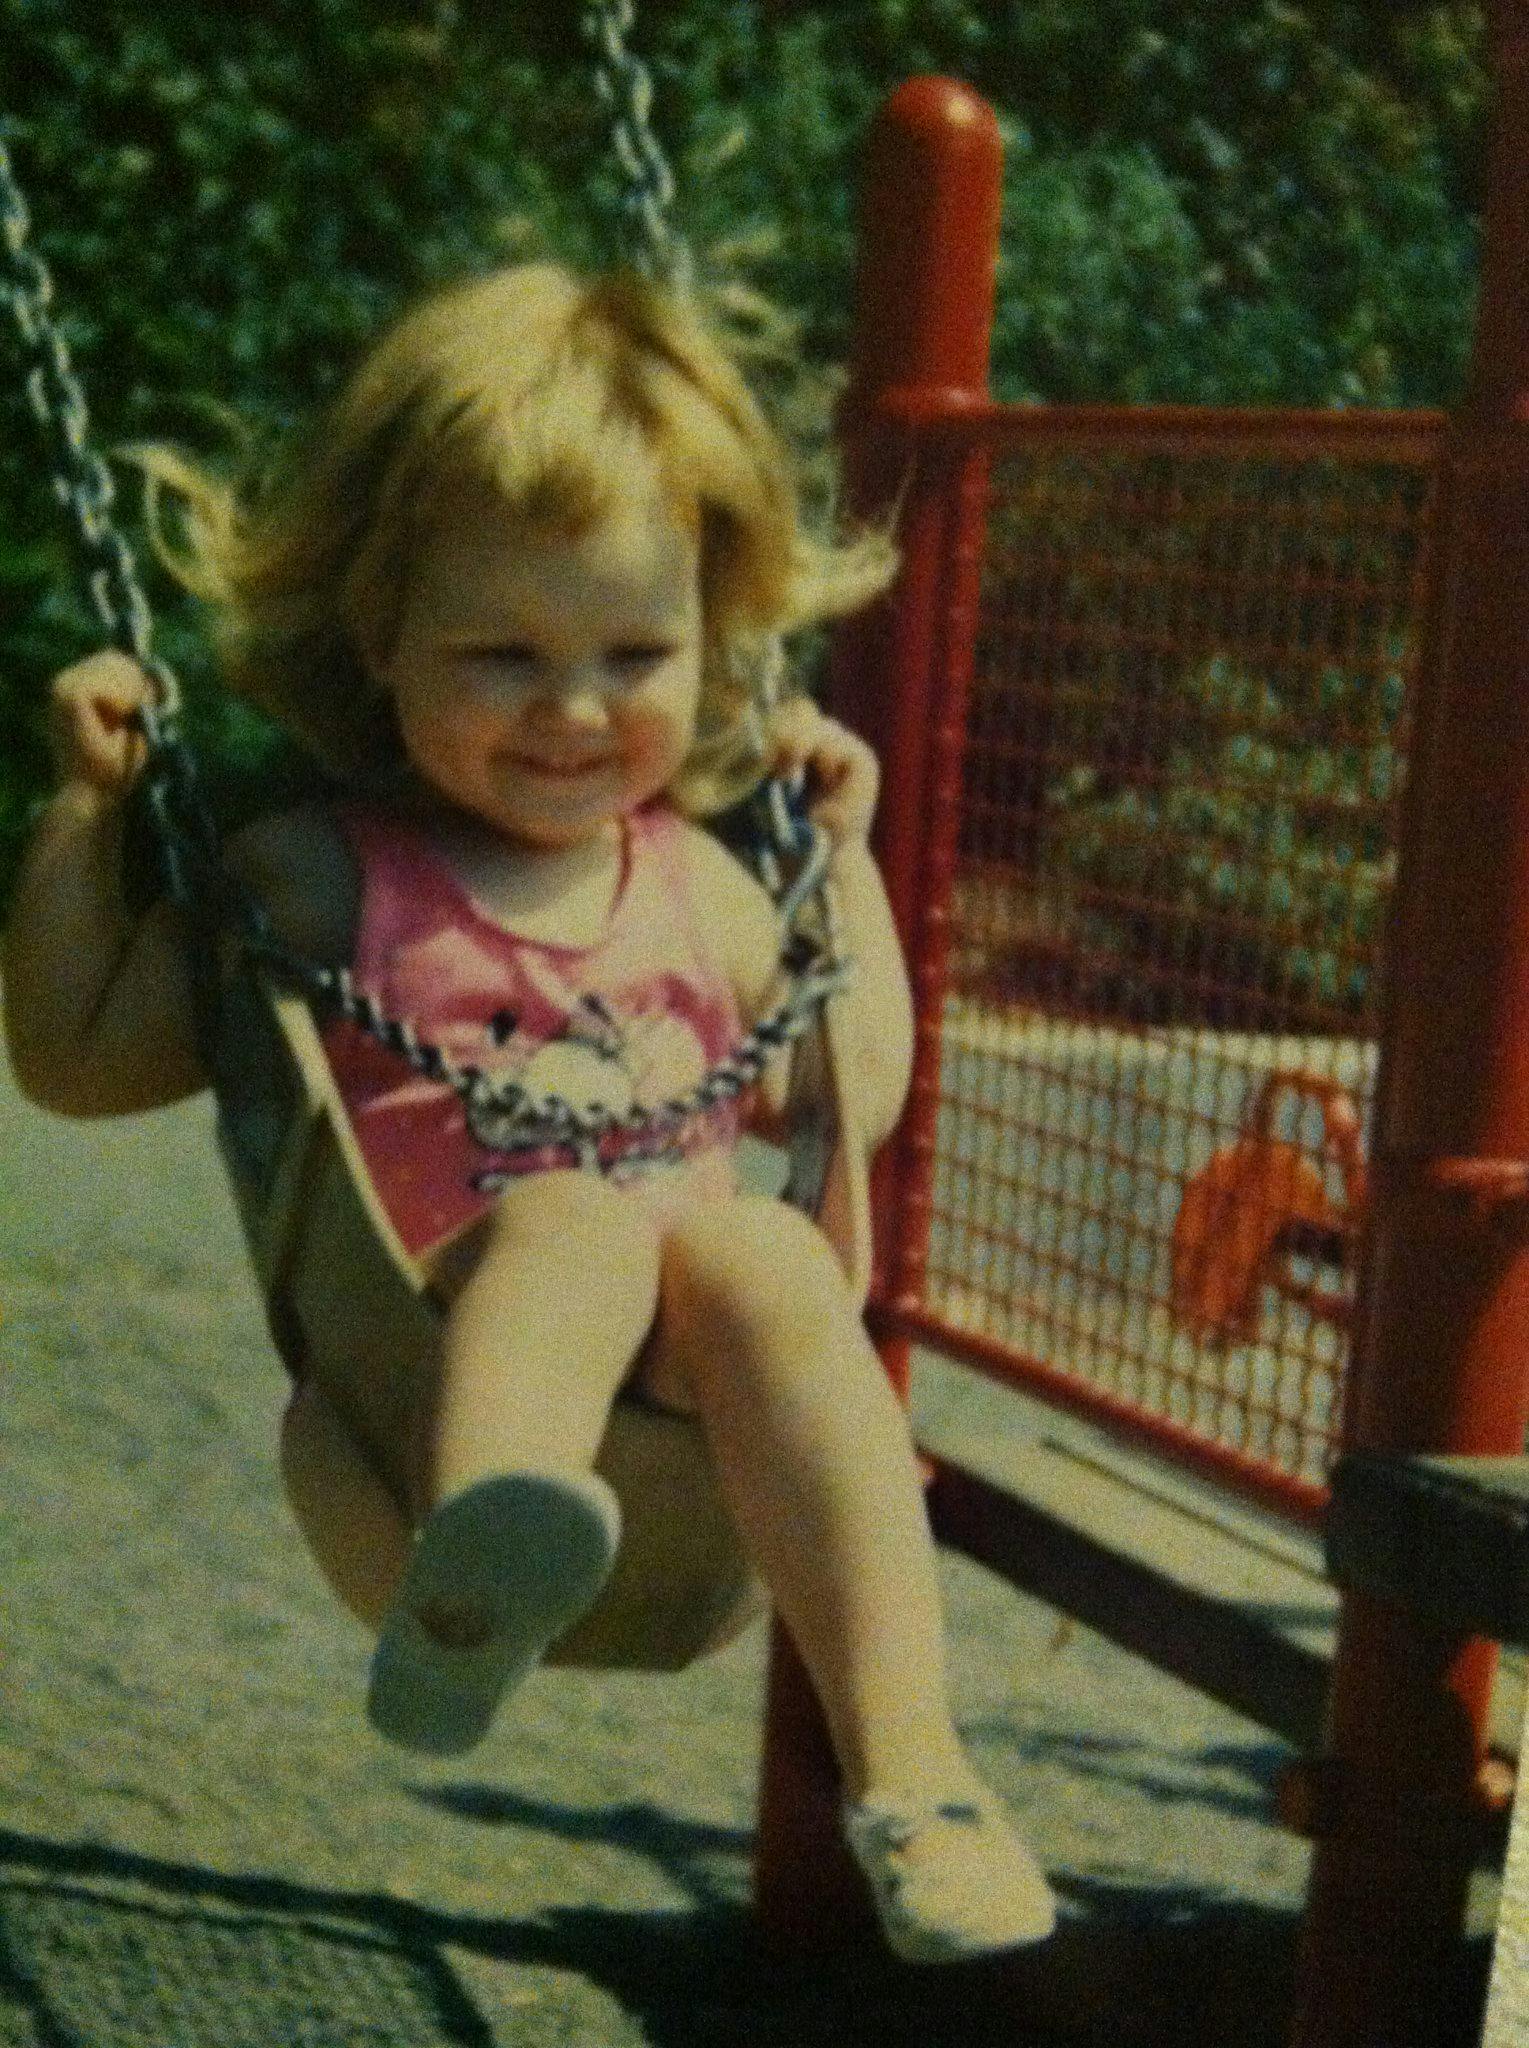 Lucy at two years old with blond hair and pink Snoopy tank top, riding in a swing and smiling